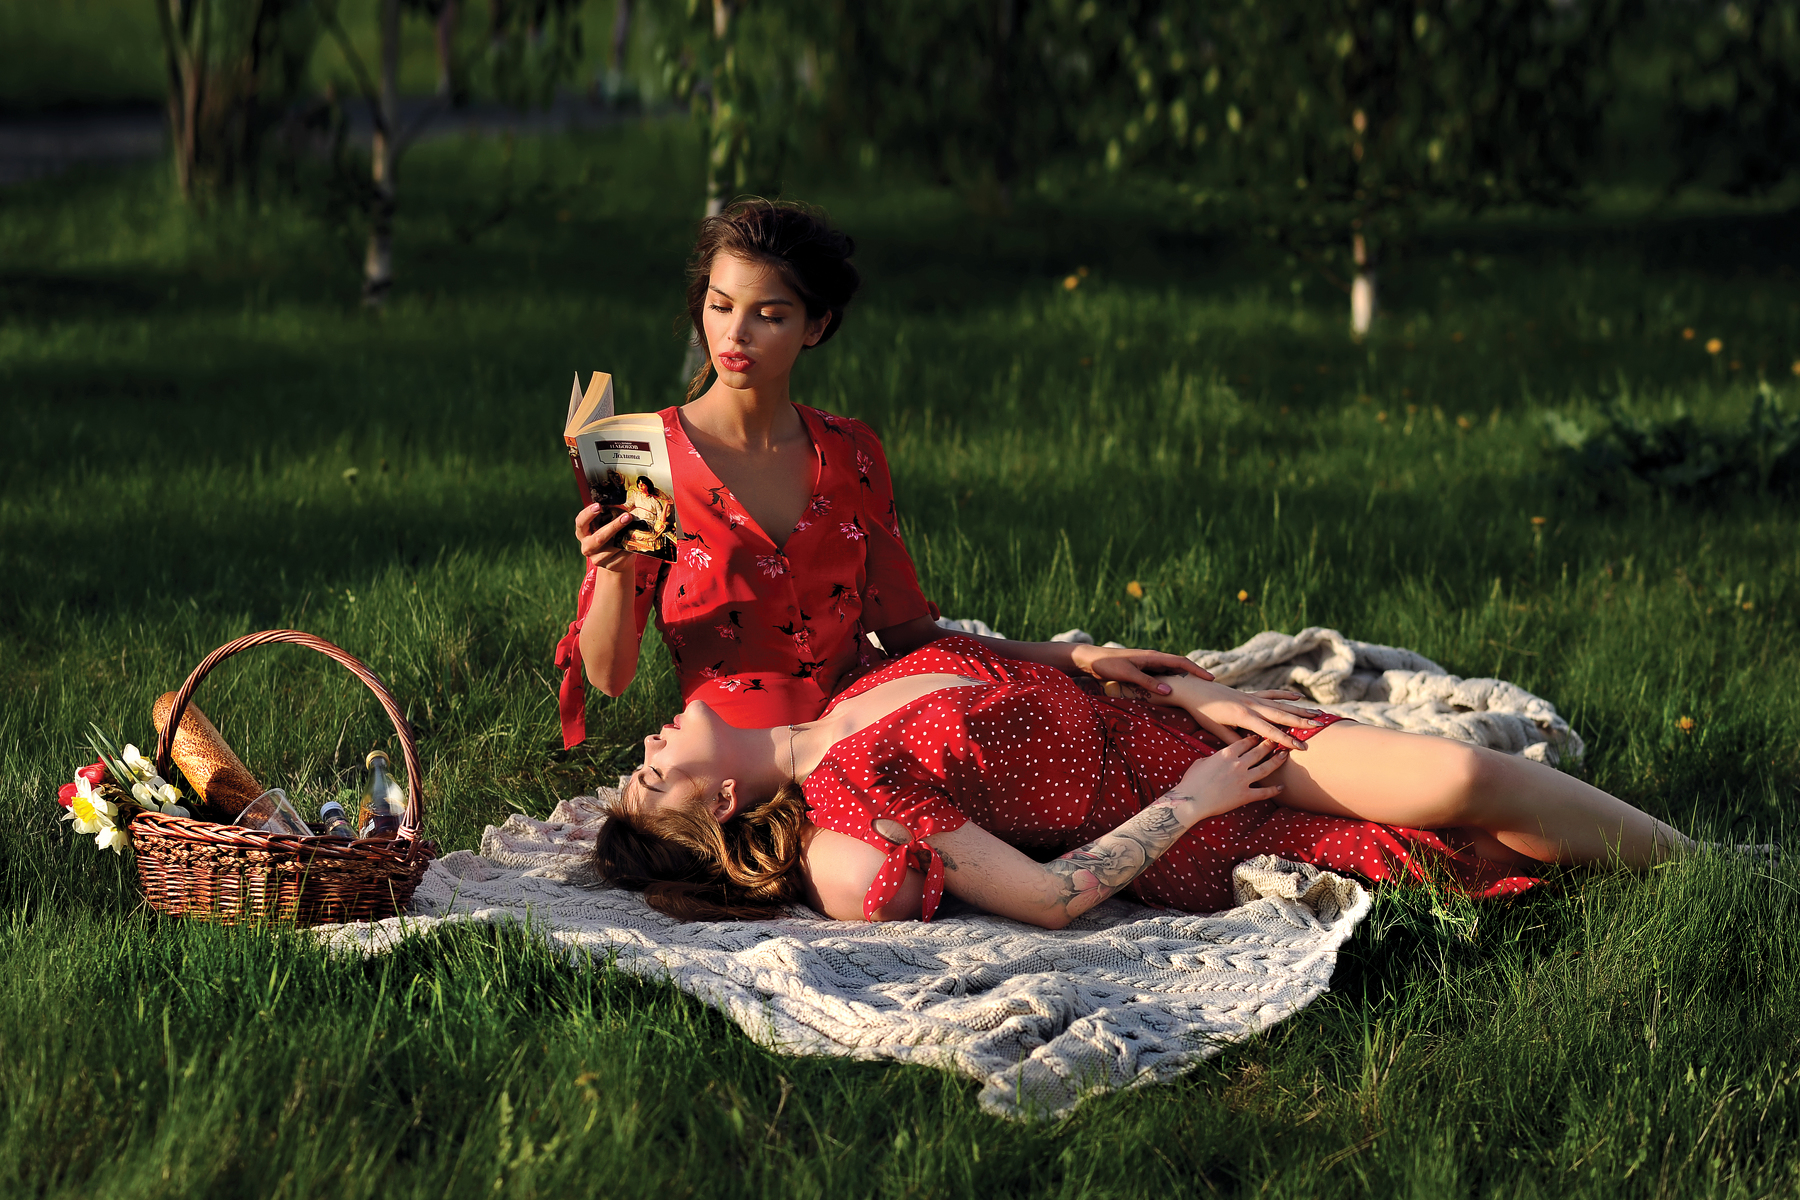 People 1800x1200 women model brunette two women depth of field grass picnic baskets dress red dress books reading cleavage inked girls tattoo lying on back blankets outdoors women outdoors closed eyes